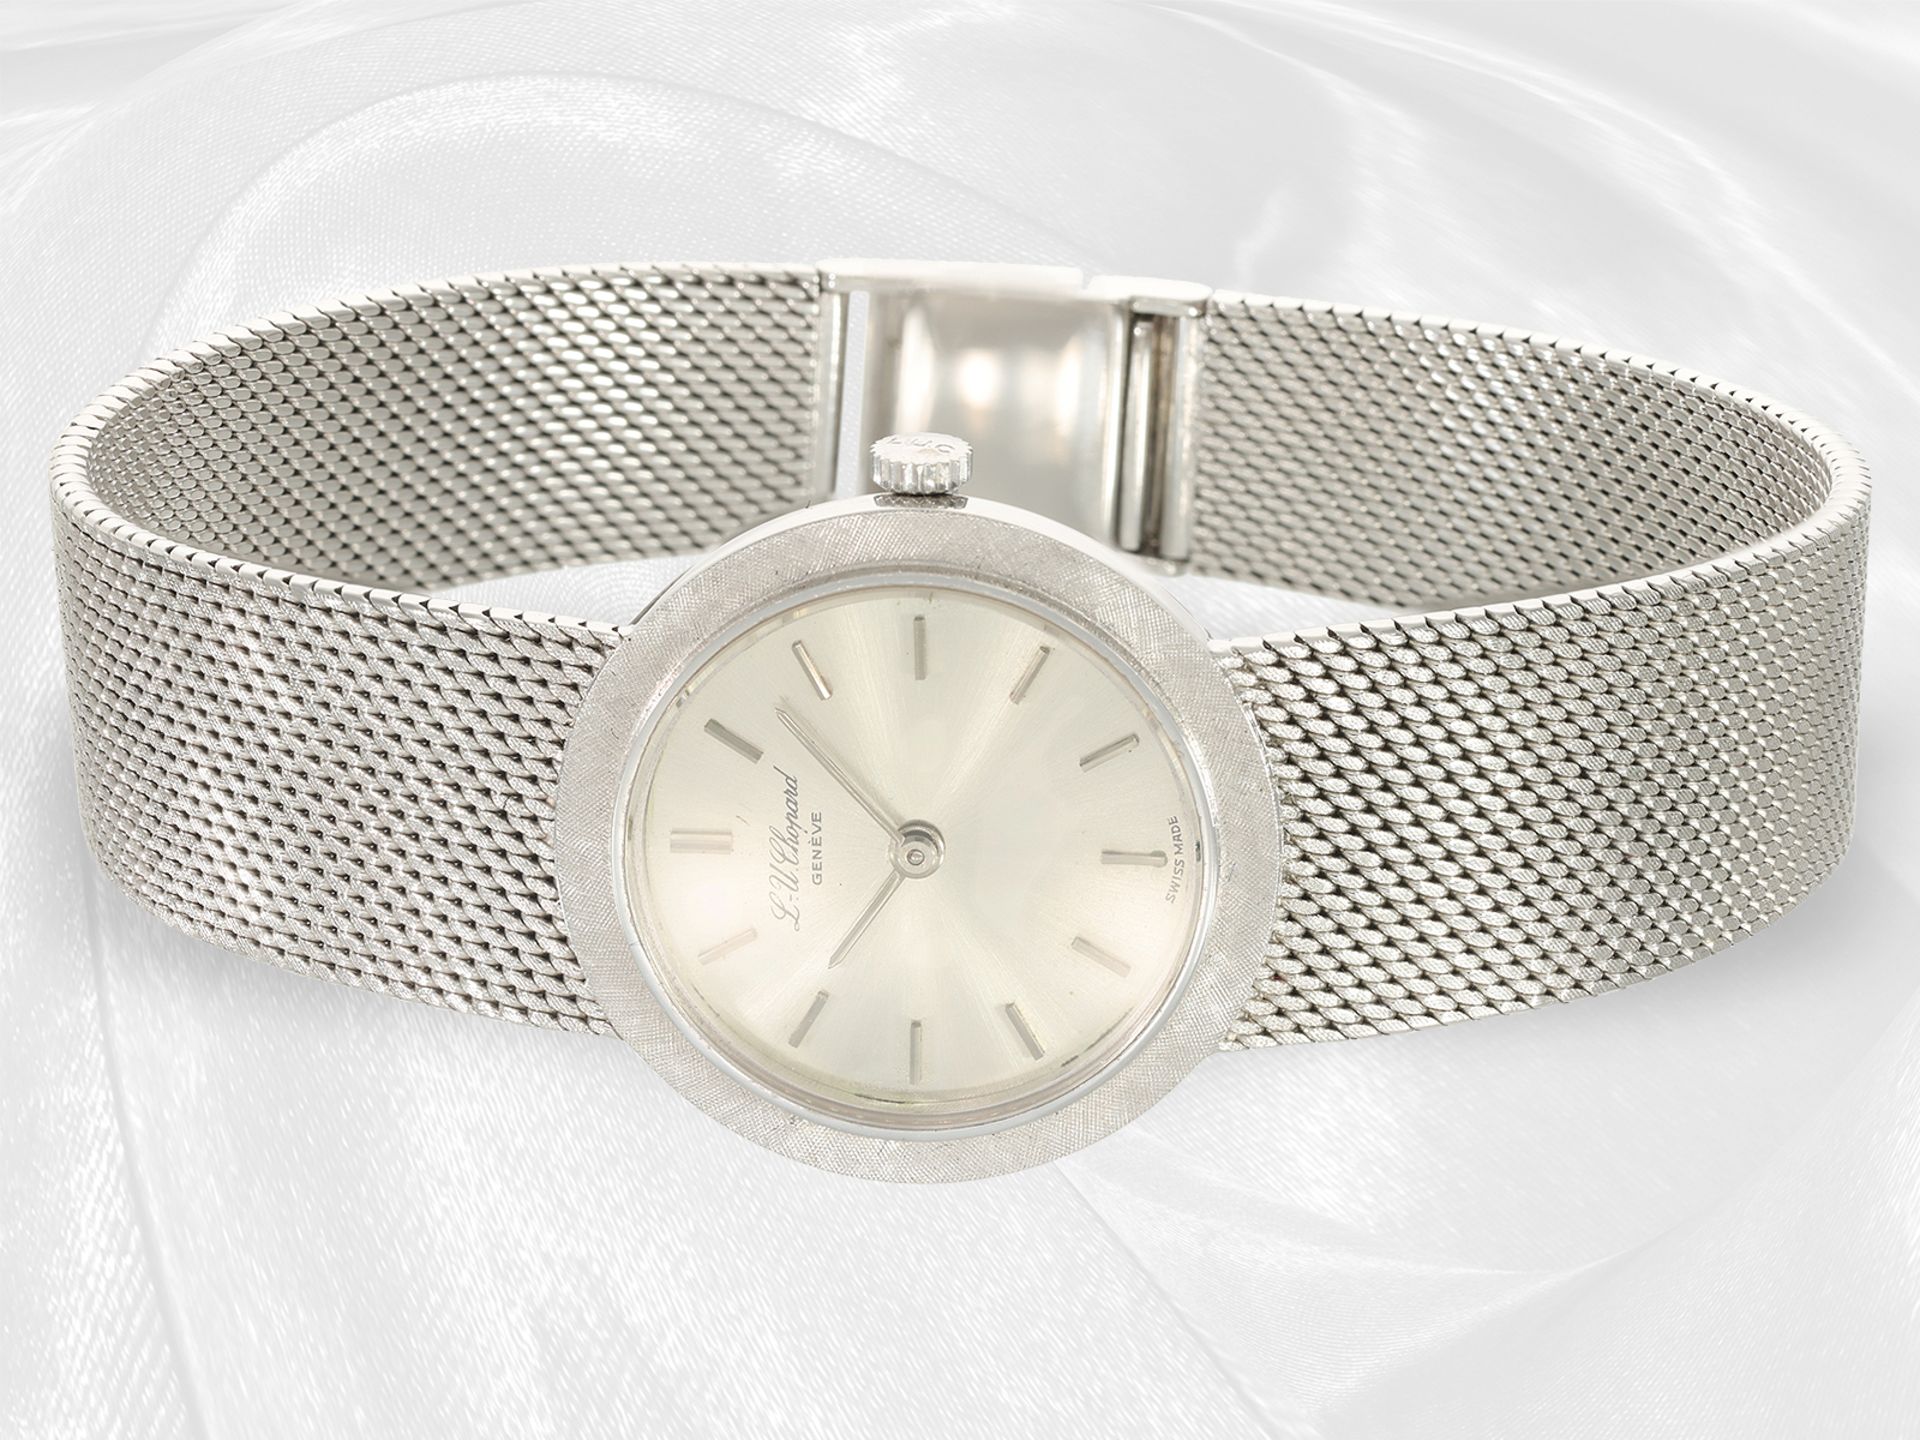 Wristwatch: fine, white gold vintage ladies' watch by Chopard, manual winding, 18K white gold - Image 5 of 5